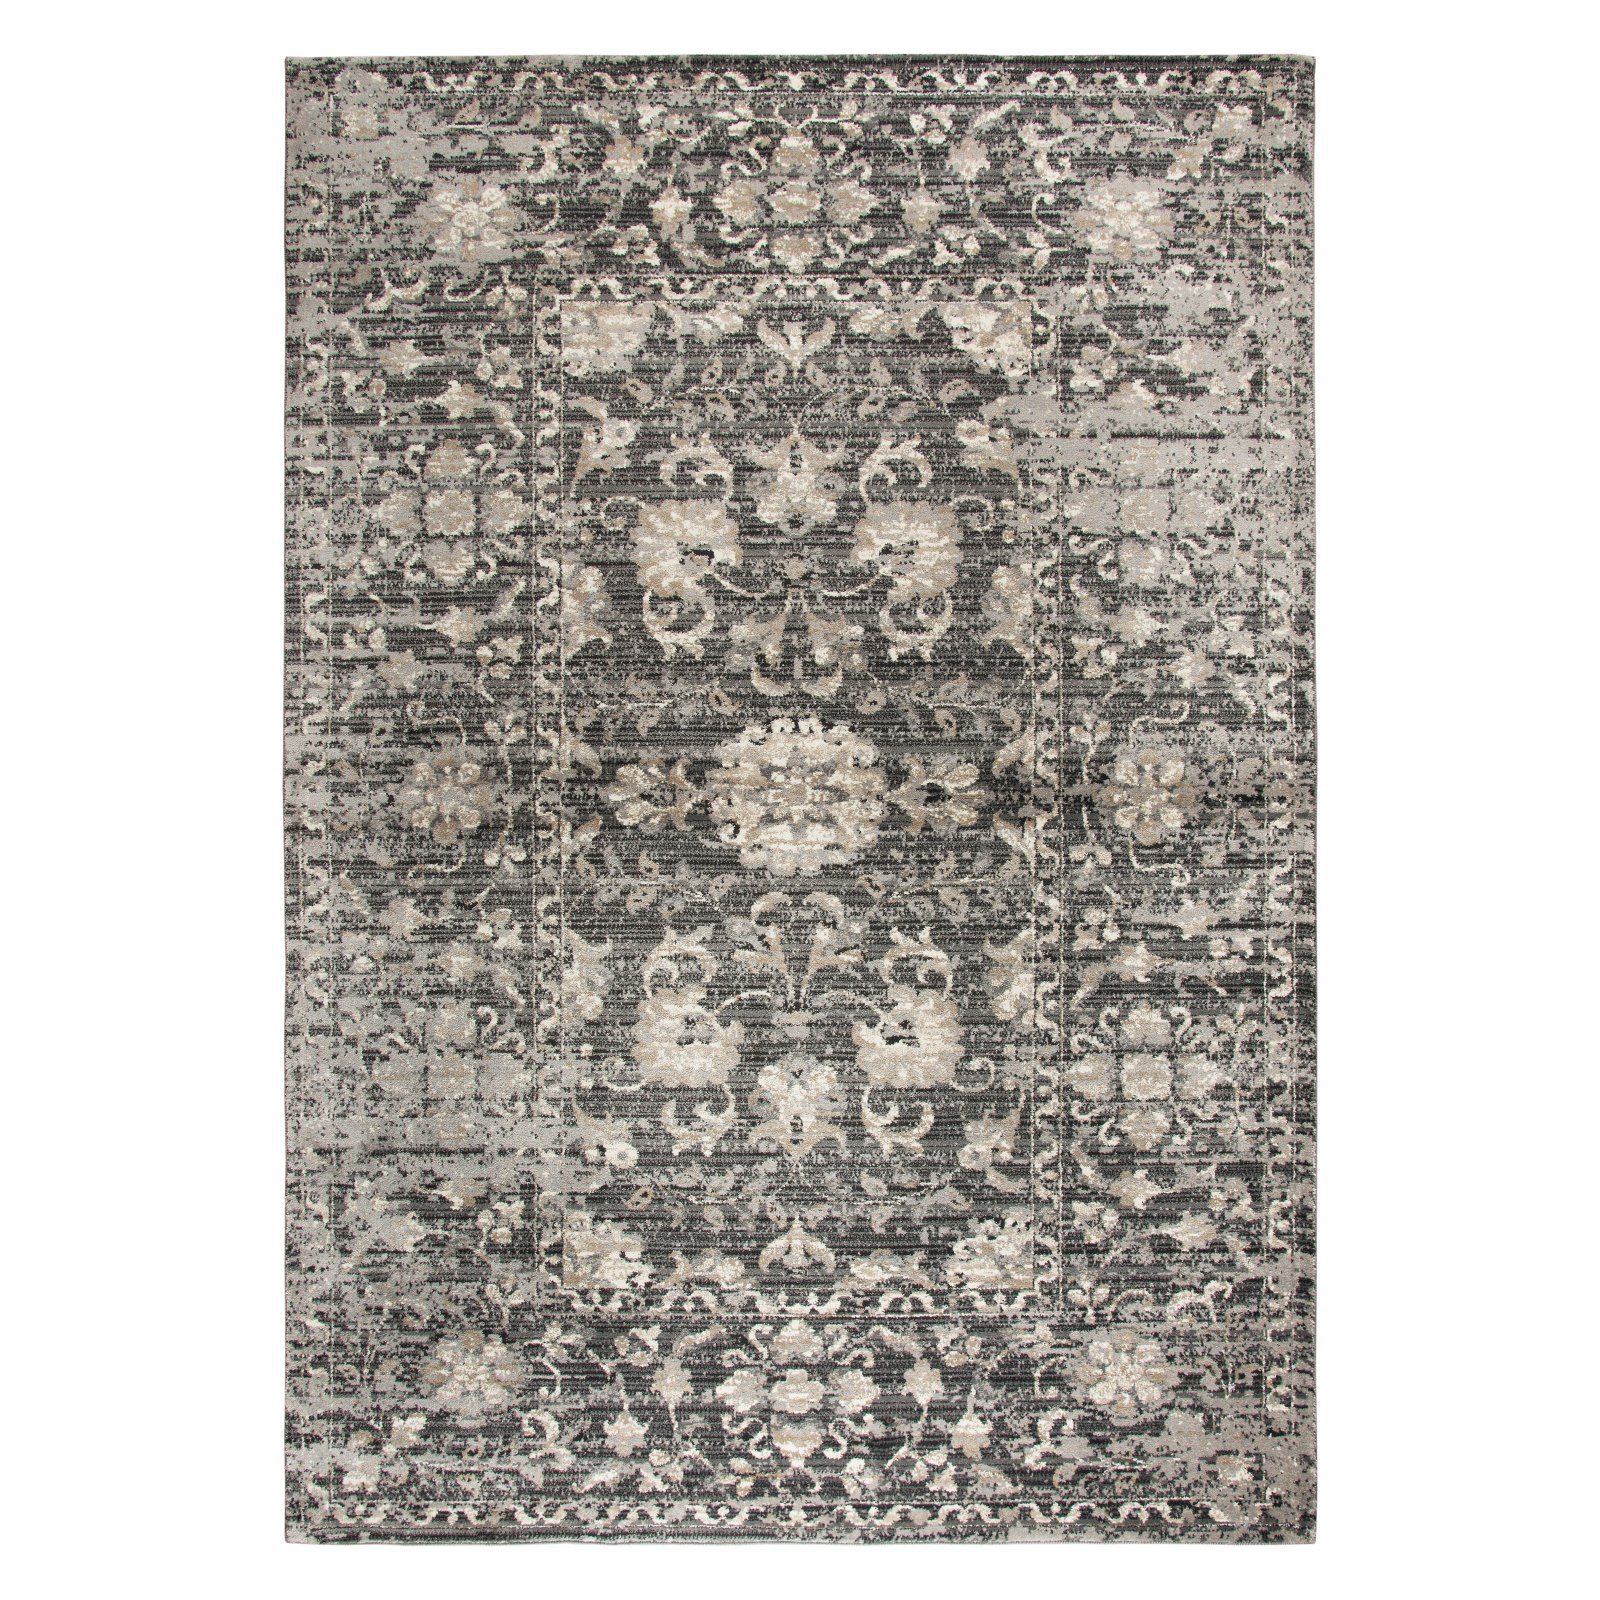 Rizzy Home Panache PN6986 Indoor Area Rug - image 1 of 6